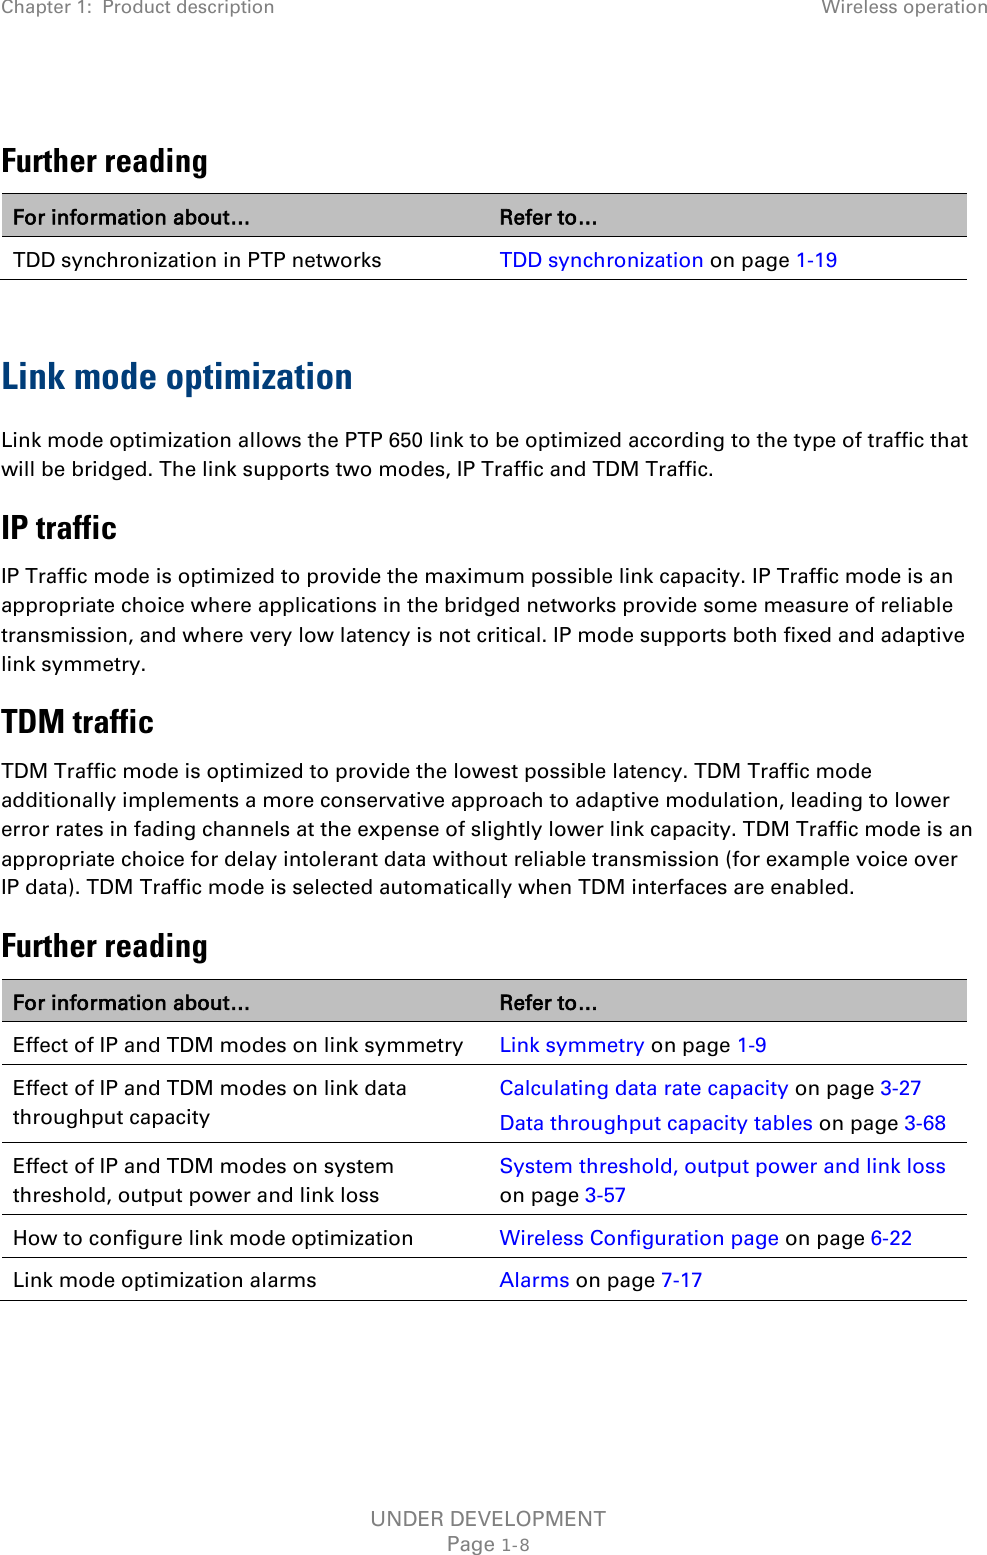 Chapter 1:  Product description Wireless operation   Further reading For information about… Refer to… TDD synchronization in PTP networks TDD synchronization on page 1-19  Link mode optimization Link mode optimization allows the PTP 650 link to be optimized according to the type of traffic that will be bridged. The link supports two modes, IP Traffic and TDM Traffic. IP traffic IP Traffic mode is optimized to provide the maximum possible link capacity. IP Traffic mode is an appropriate choice where applications in the bridged networks provide some measure of reliable transmission, and where very low latency is not critical. IP mode supports both fixed and adaptive link symmetry. TDM traffic TDM Traffic mode is optimized to provide the lowest possible latency. TDM Traffic mode additionally implements a more conservative approach to adaptive modulation, leading to lower error rates in fading channels at the expense of slightly lower link capacity. TDM Traffic mode is an appropriate choice for delay intolerant data without reliable transmission (for example voice over IP data). TDM Traffic mode is selected automatically when TDM interfaces are enabled. Further reading For information about… Refer to… Effect of IP and TDM modes on link symmetry Link symmetry on page 1-9 Effect of IP and TDM modes on link data throughput capacity Calculating data rate capacity on page 3-27 Data throughput capacity tables on page 3-68 Effect of IP and TDM modes on system threshold, output power and link loss System threshold, output power and link loss on page 3-57 How to configure link mode optimization Wireless Configuration page on page 6-22 Link mode optimization alarms Alarms on page 7-17    UNDER DEVELOPMENT Page 1-8 